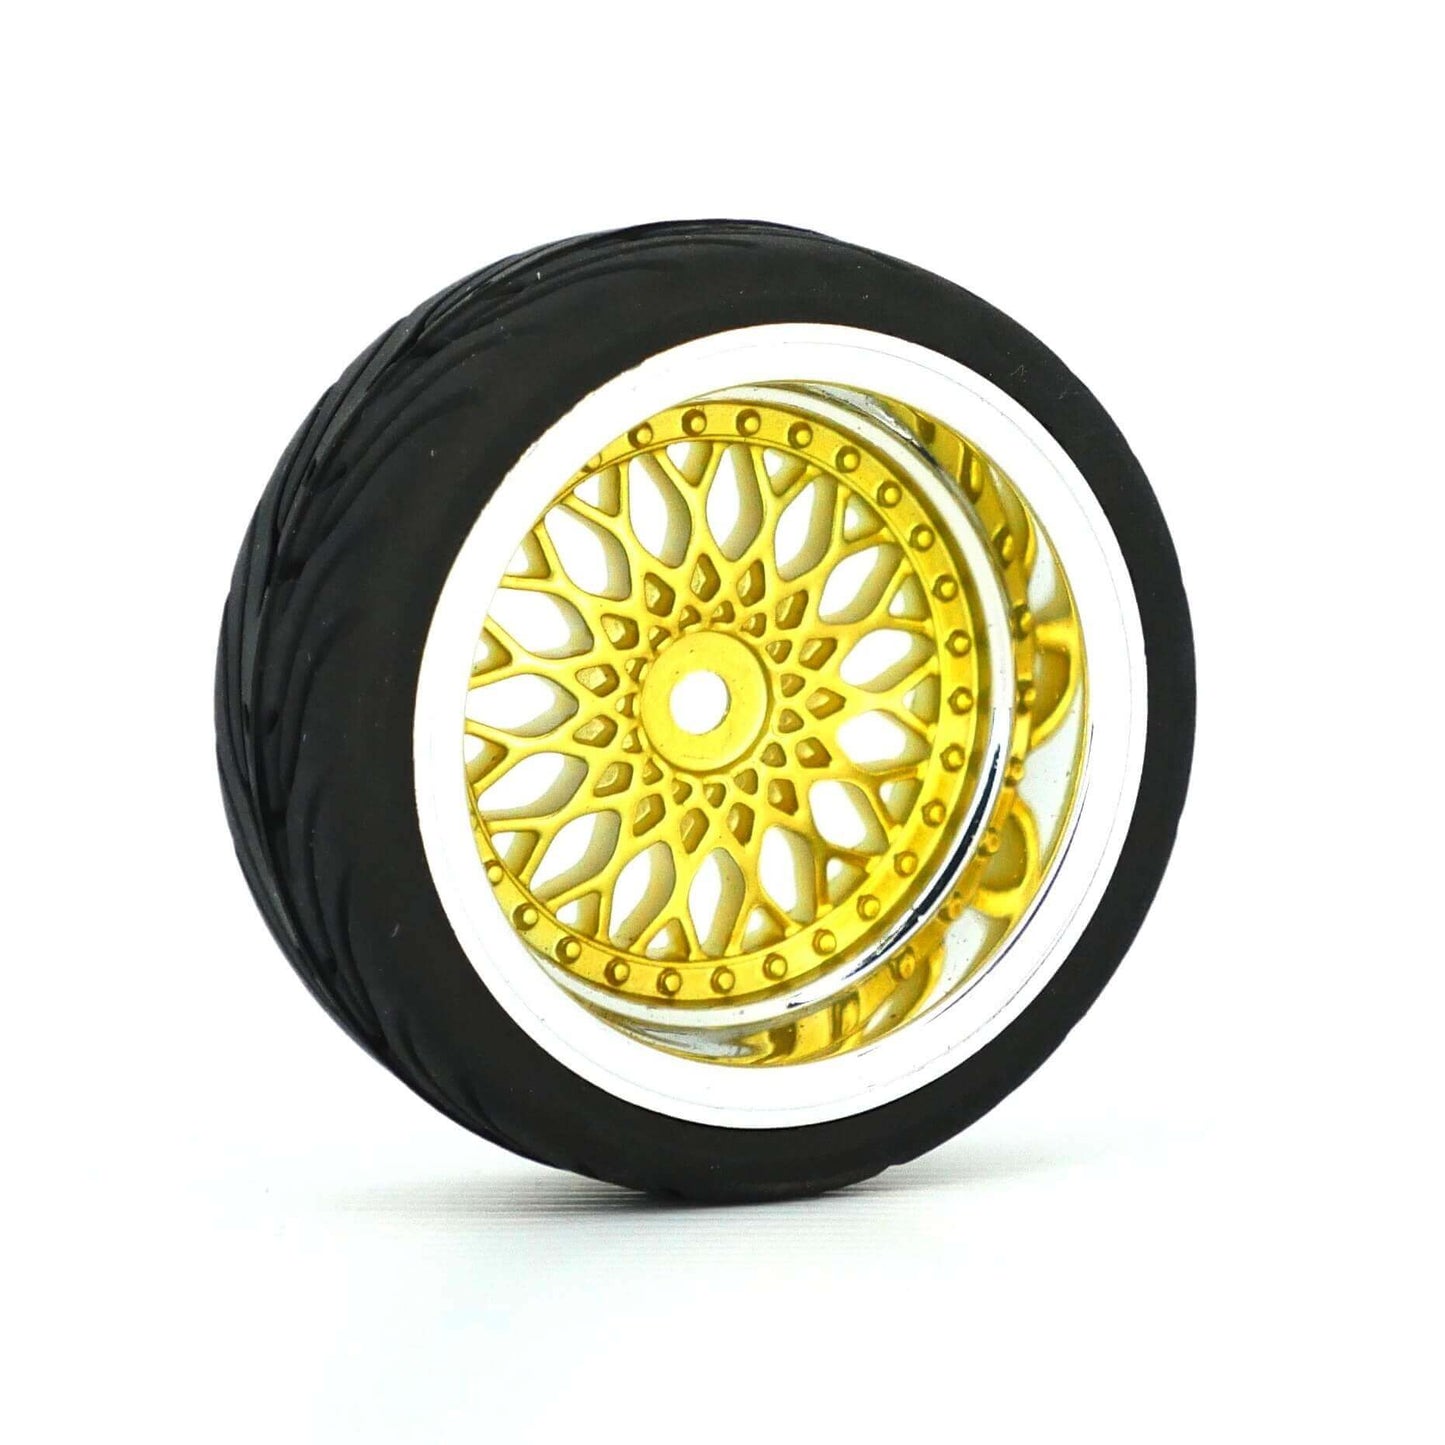 On road racing golden wheels for 1/10 RC Cars